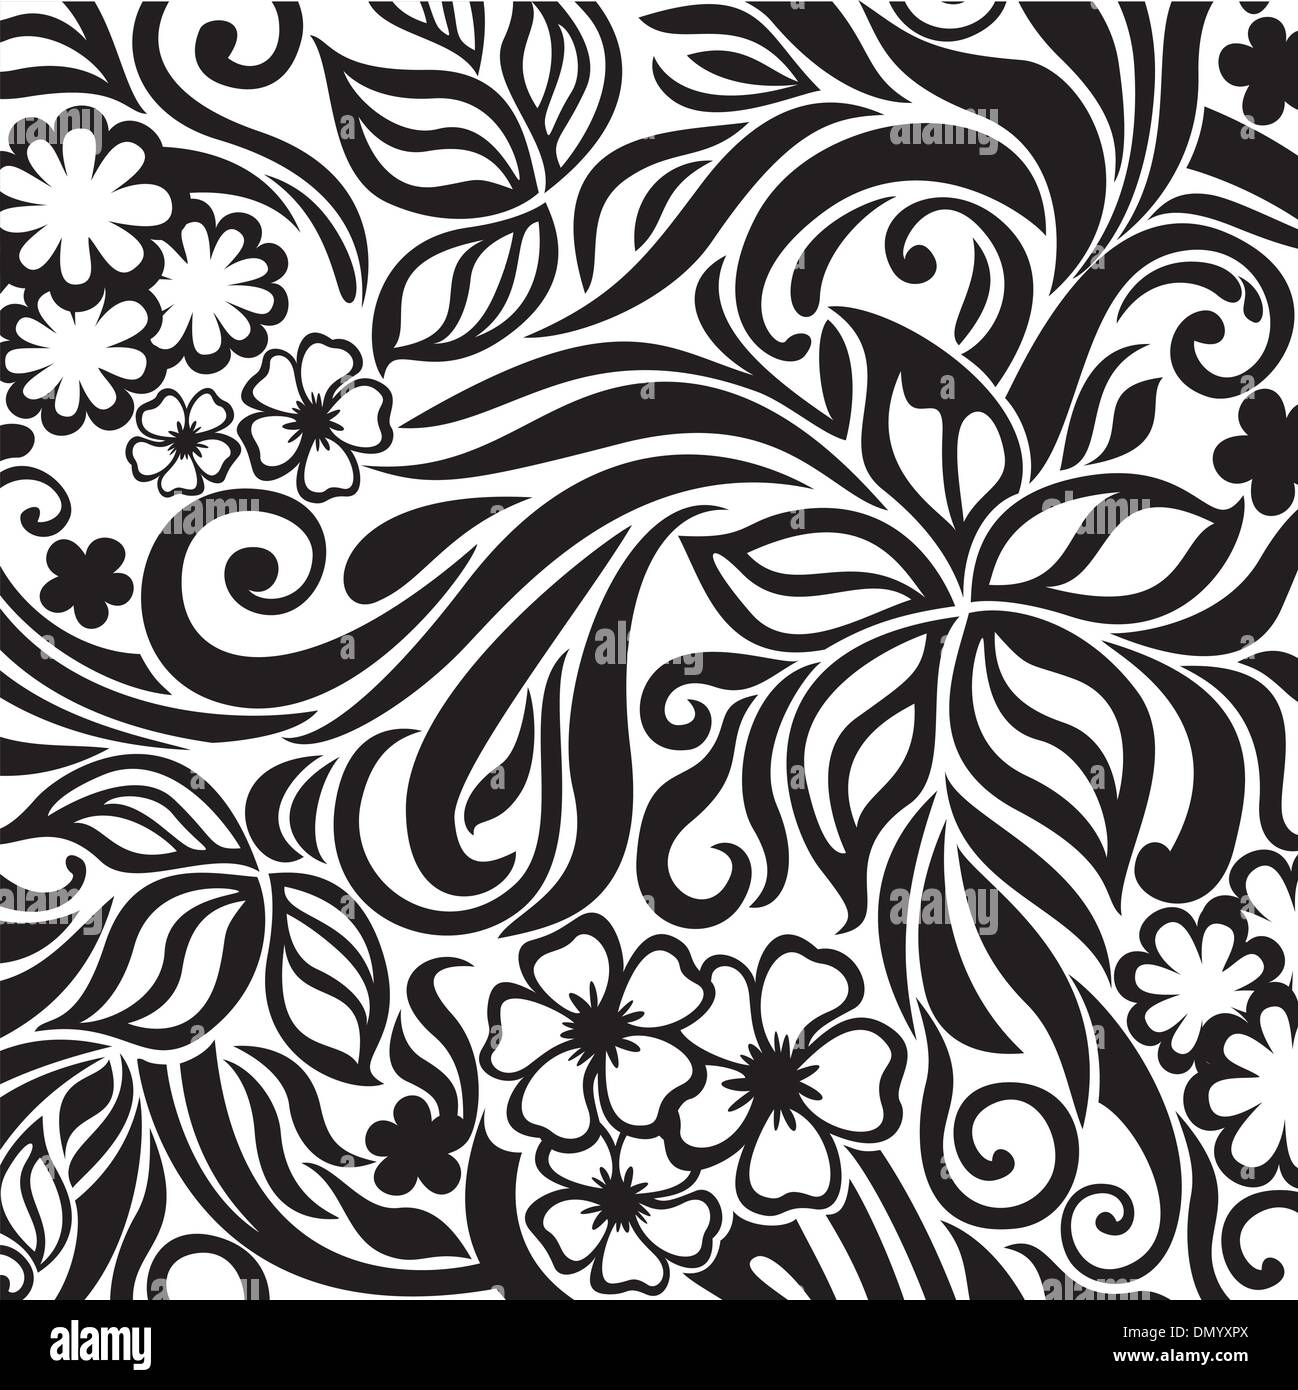 Excellent floral background Stock Vector